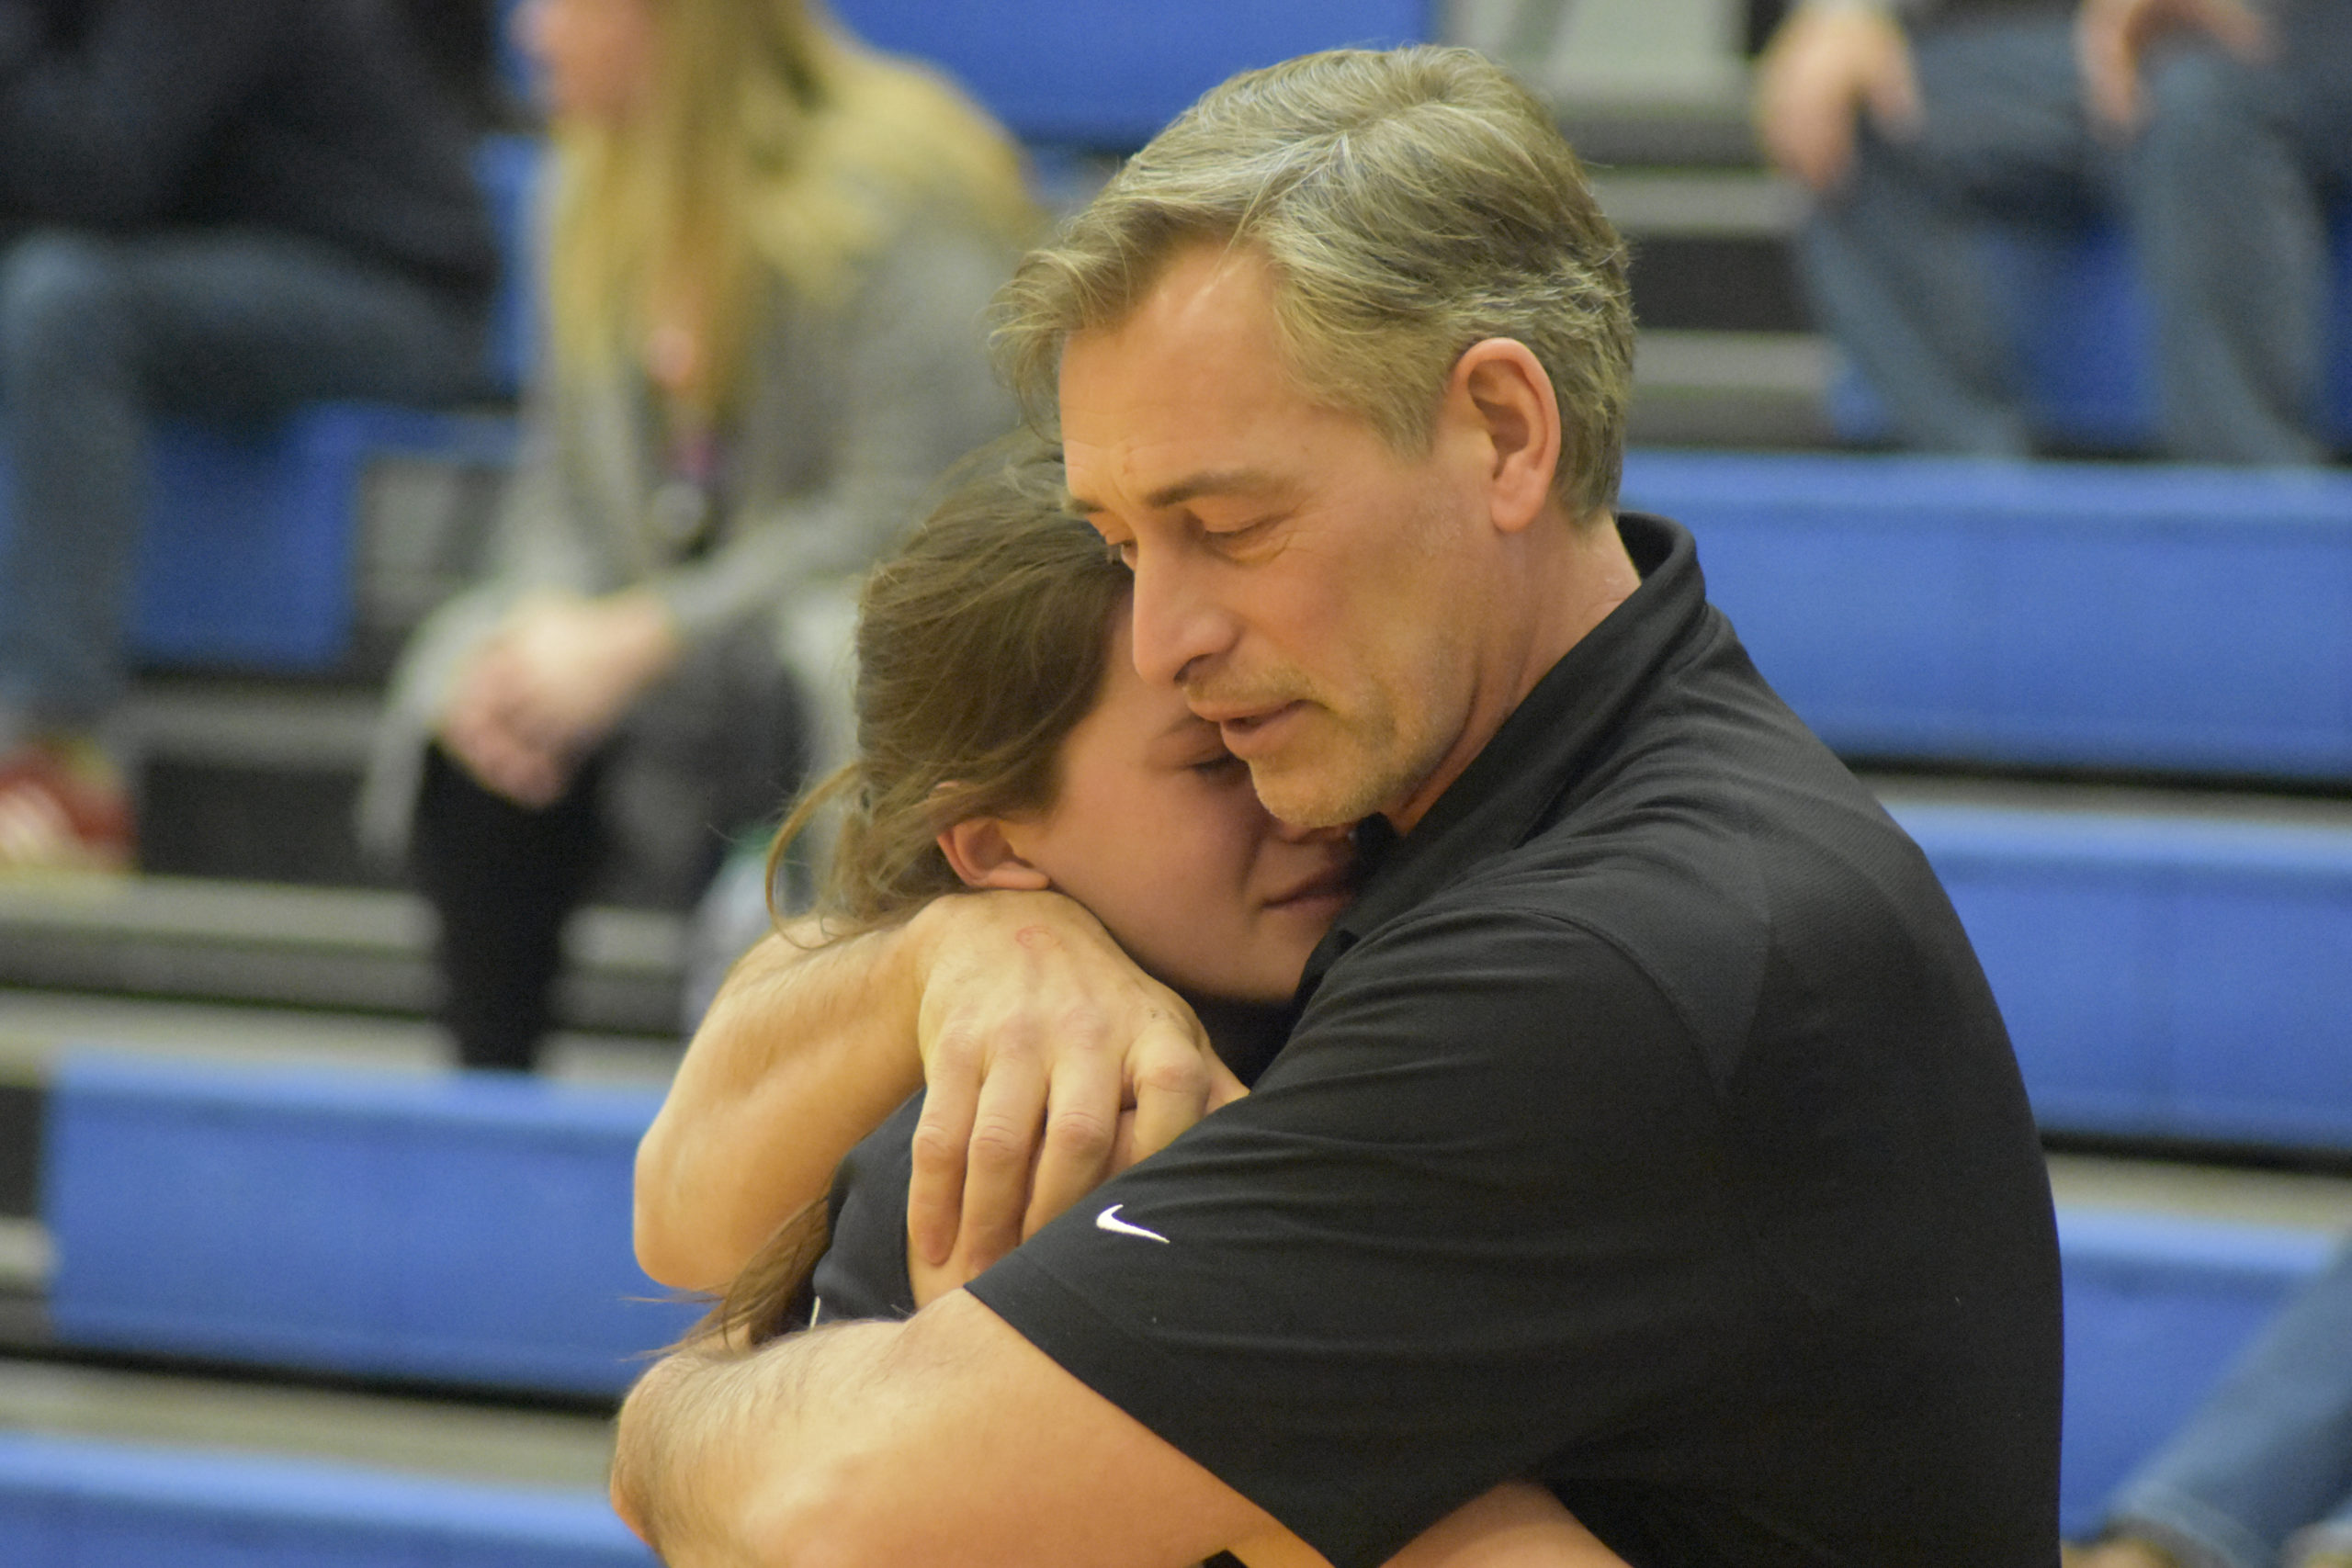 Emotional End For Lady Whalers 
March 14 -- The Pierson/Bridgehampton girls basketball team lost to Millbrook in the Regional Final at SUNY New Paltz. The Lady Whalers won the county title. George Kneeland is hugging his daughter Katie Kneeland as she walks off the court for the last time.